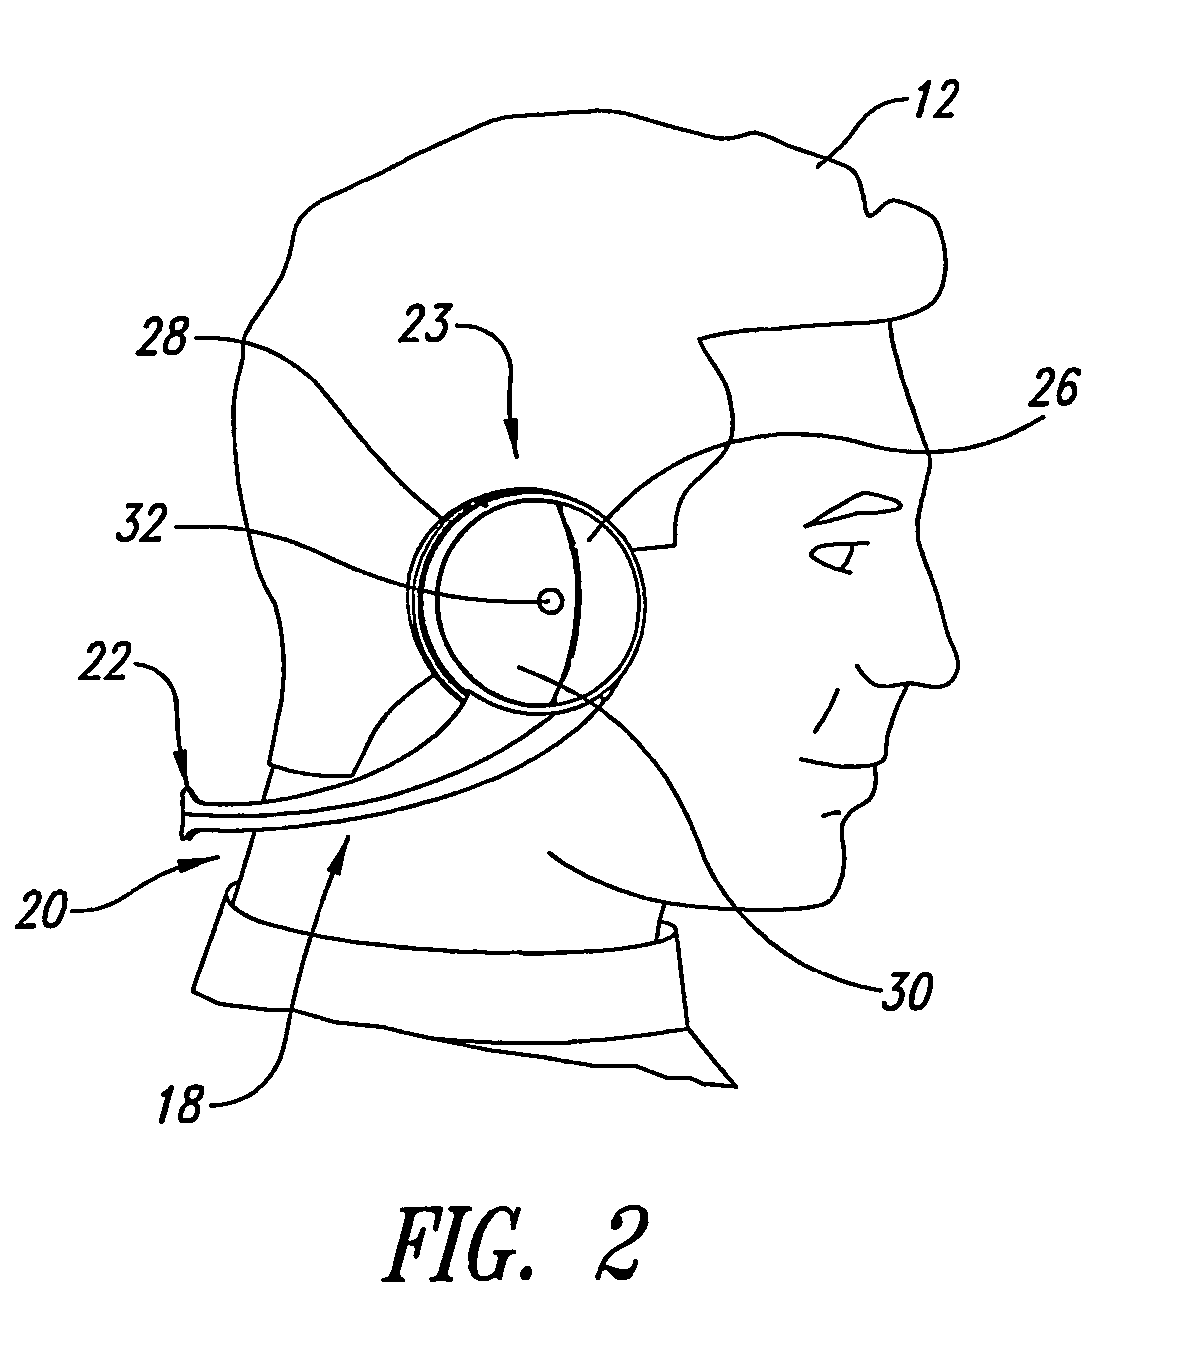 Ear protection device